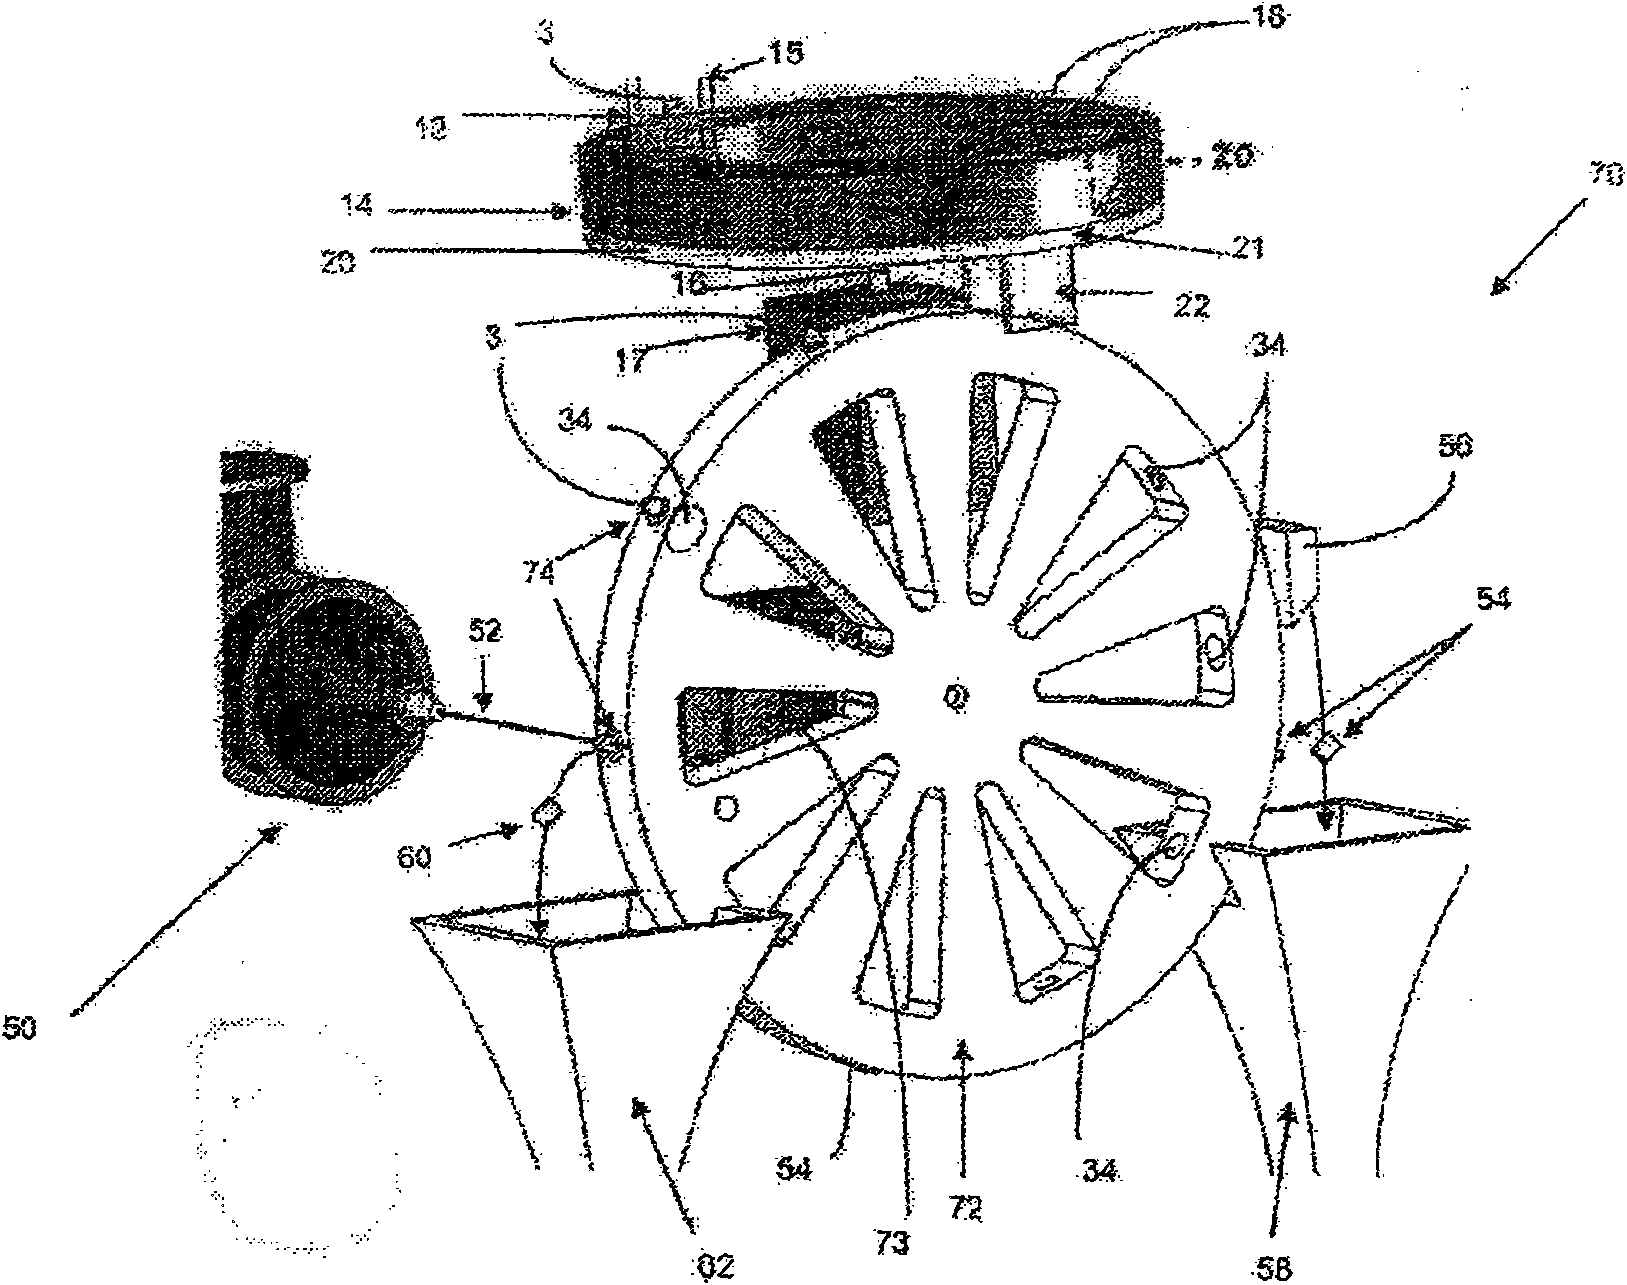 Method and process for orientating, sampling and collecting seed tissues from individual seed